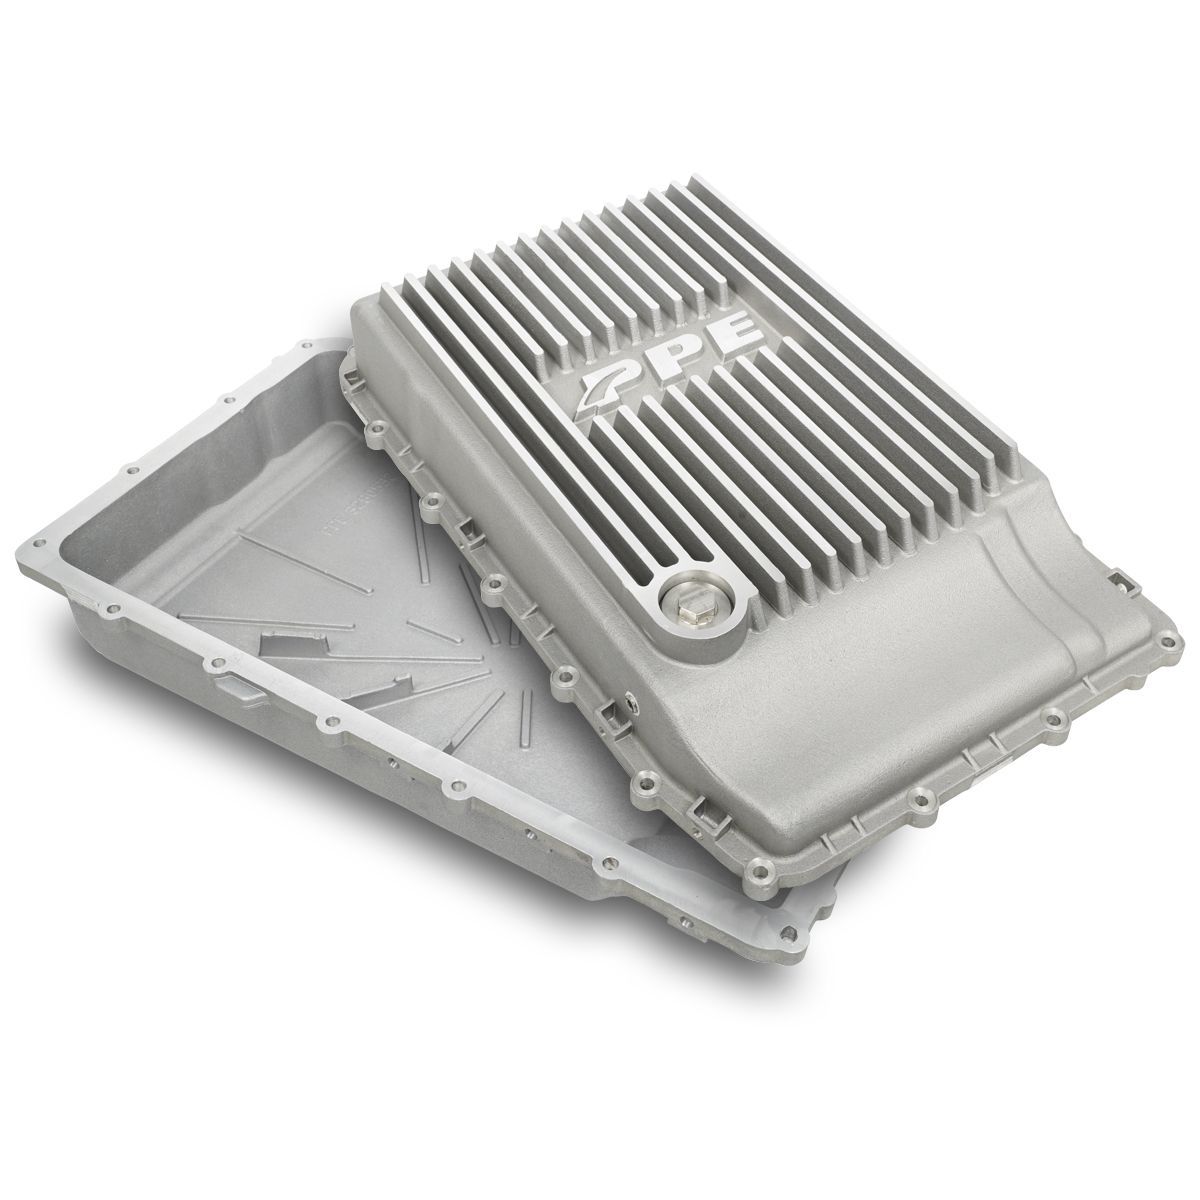 PPE - PPE Heavy-Duty Cast Aluminum 10R80 Transmission Pan (Raw) For 17+ F-150/19+ Ranger/18+ Mustang